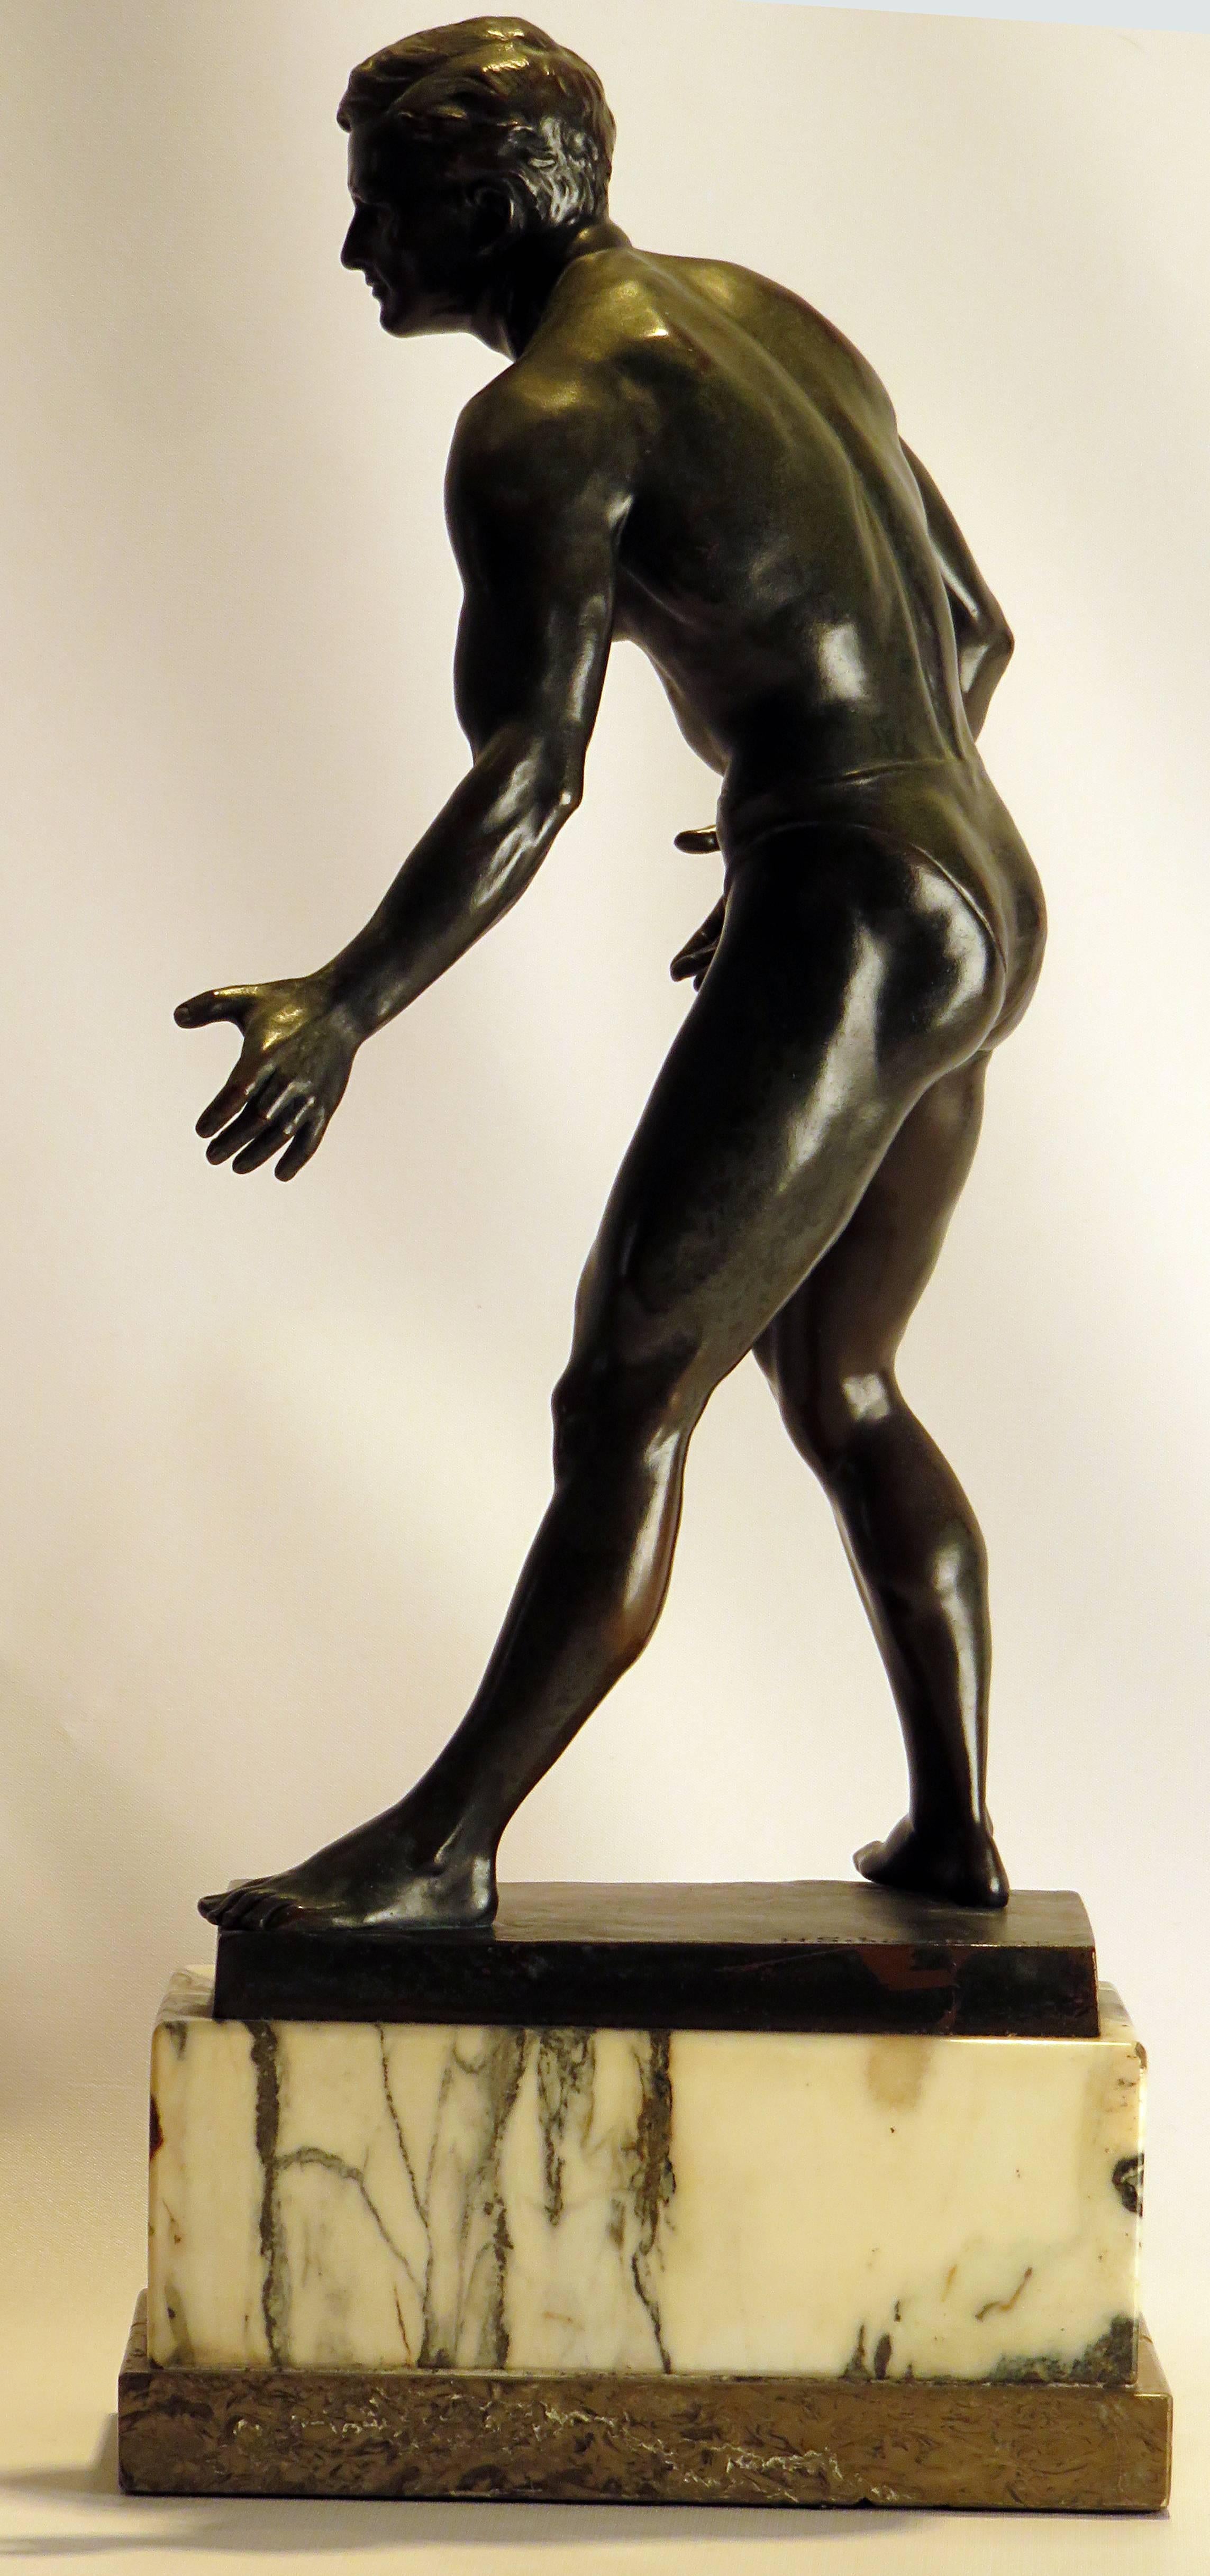 This large bronze is a well cast and modeled statue of a young and athletic wrestler. This reflects the 1920s interest in physical culture and what the idea of what a young man should look like. This piece originates in central Europe.